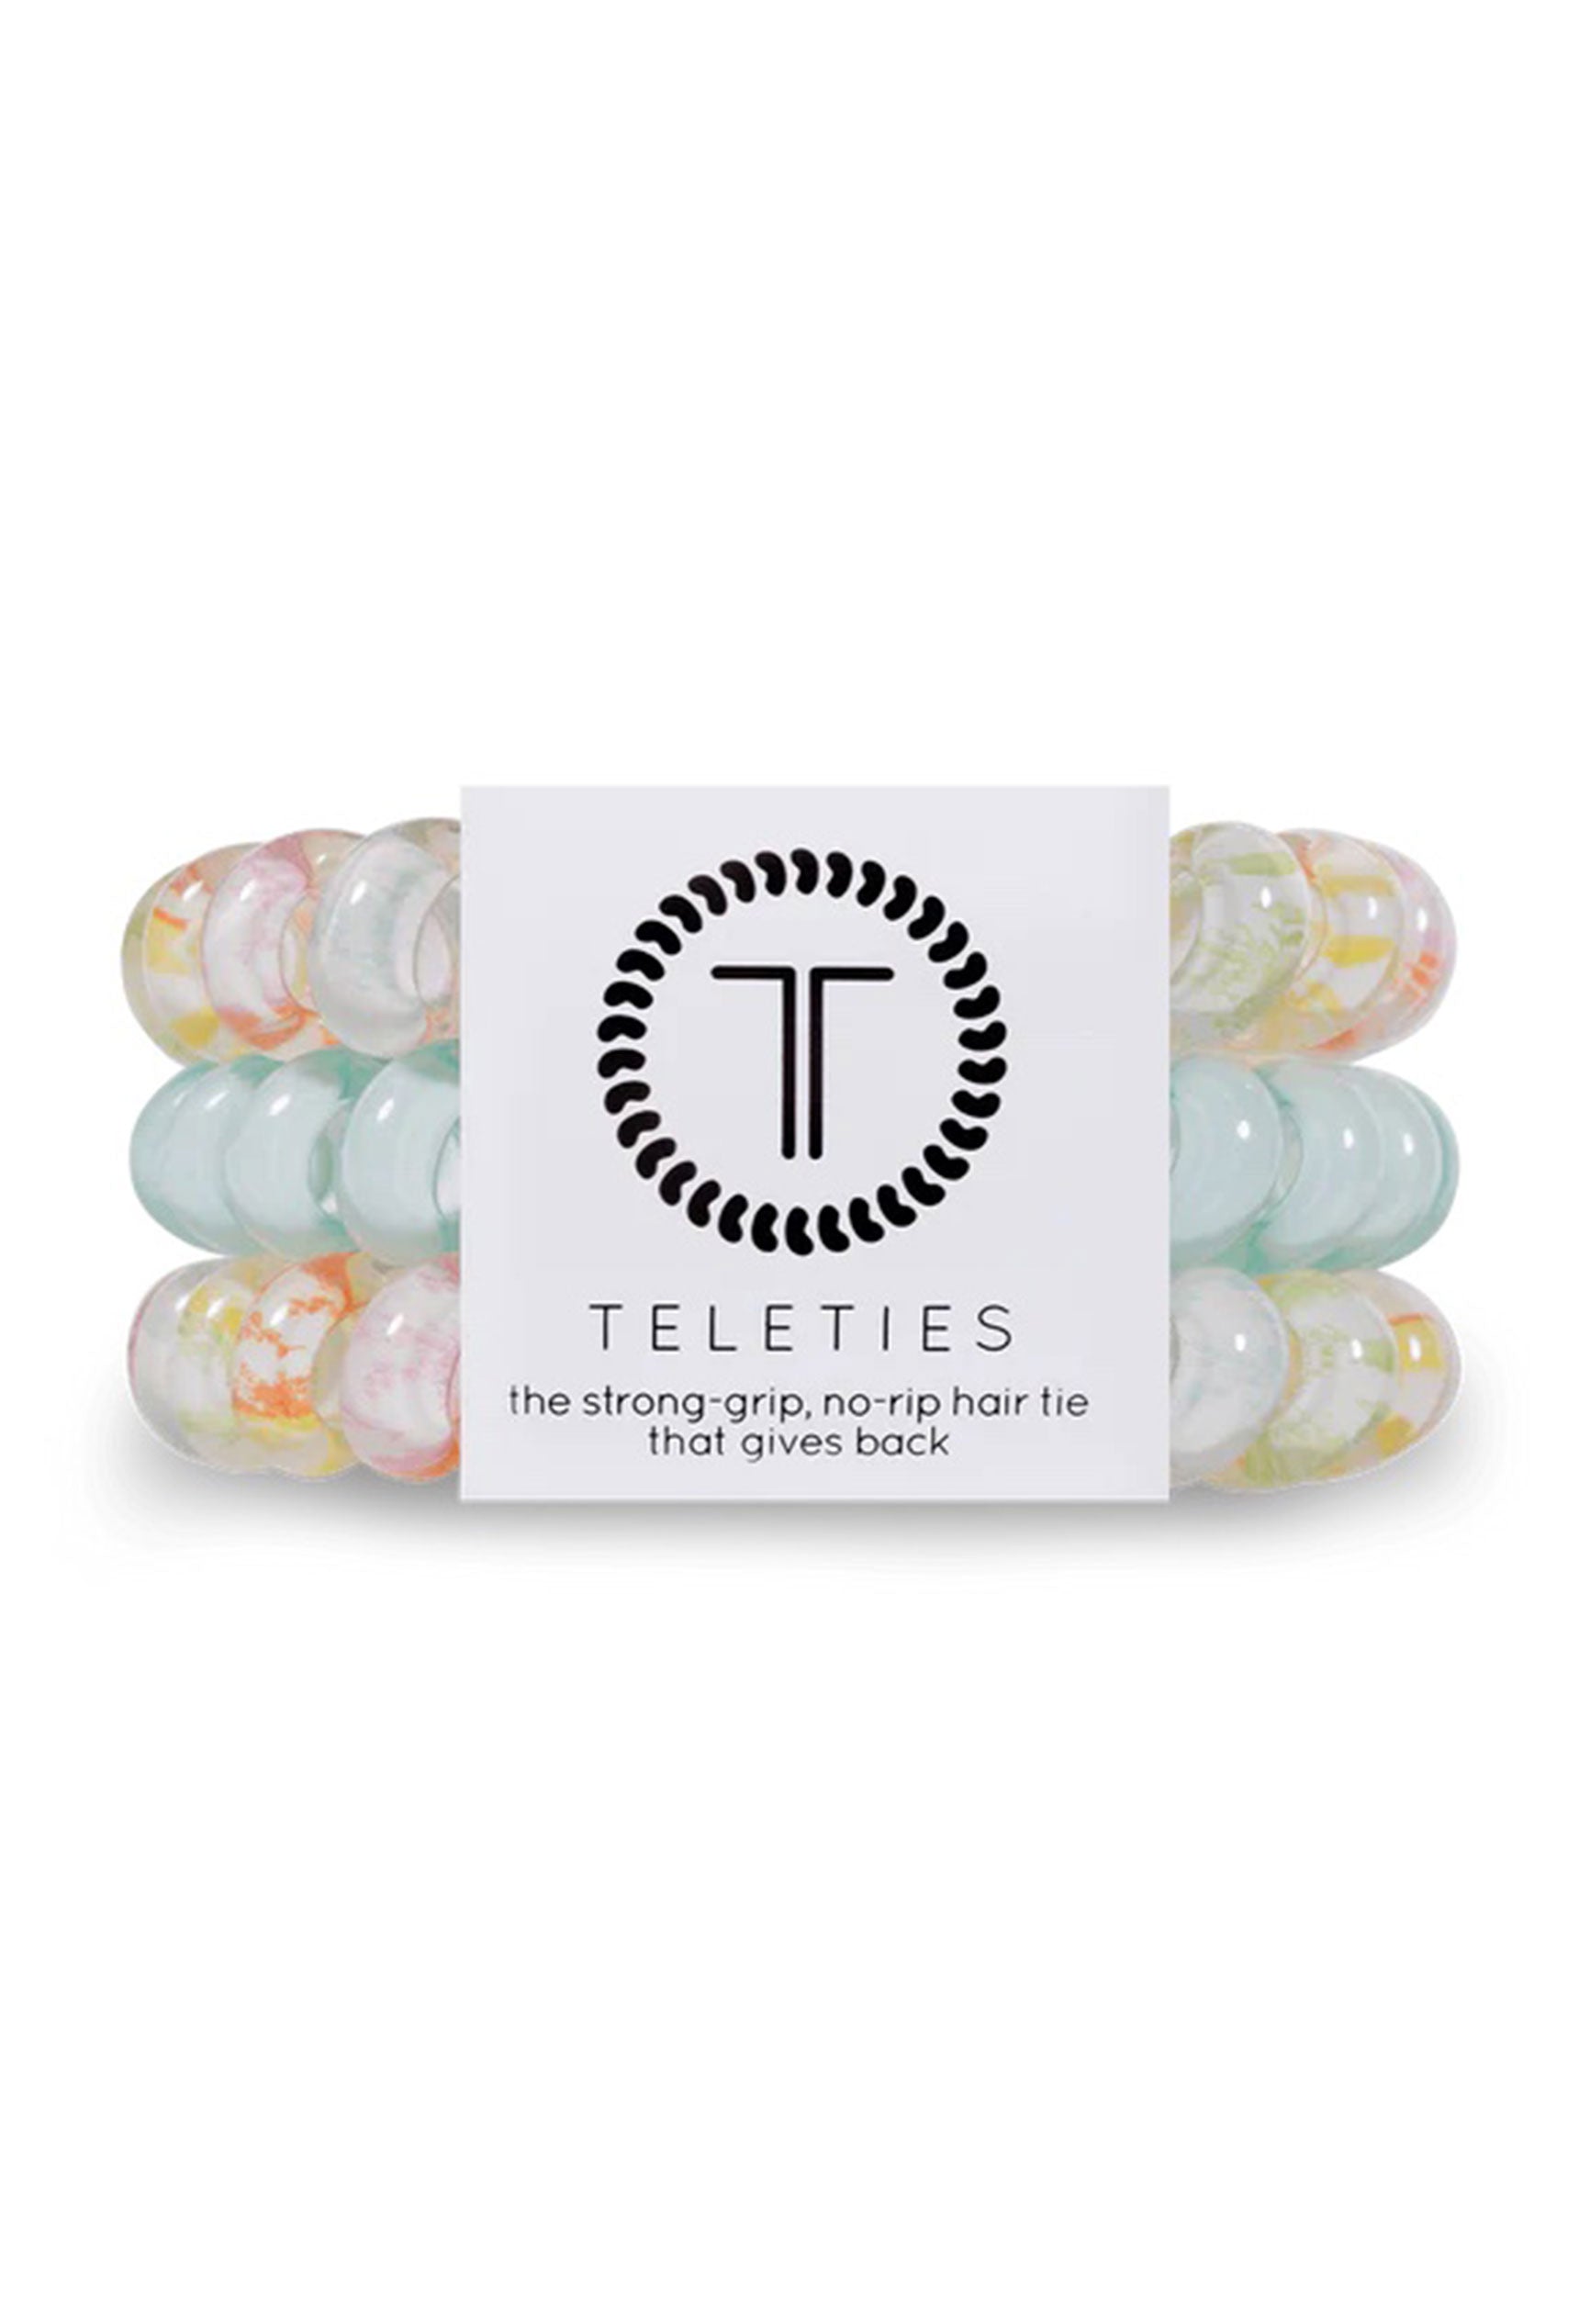 TELETIES Large Hair Ties - Garden Party, set of three large hair coils, light blue and white with pink and green detail